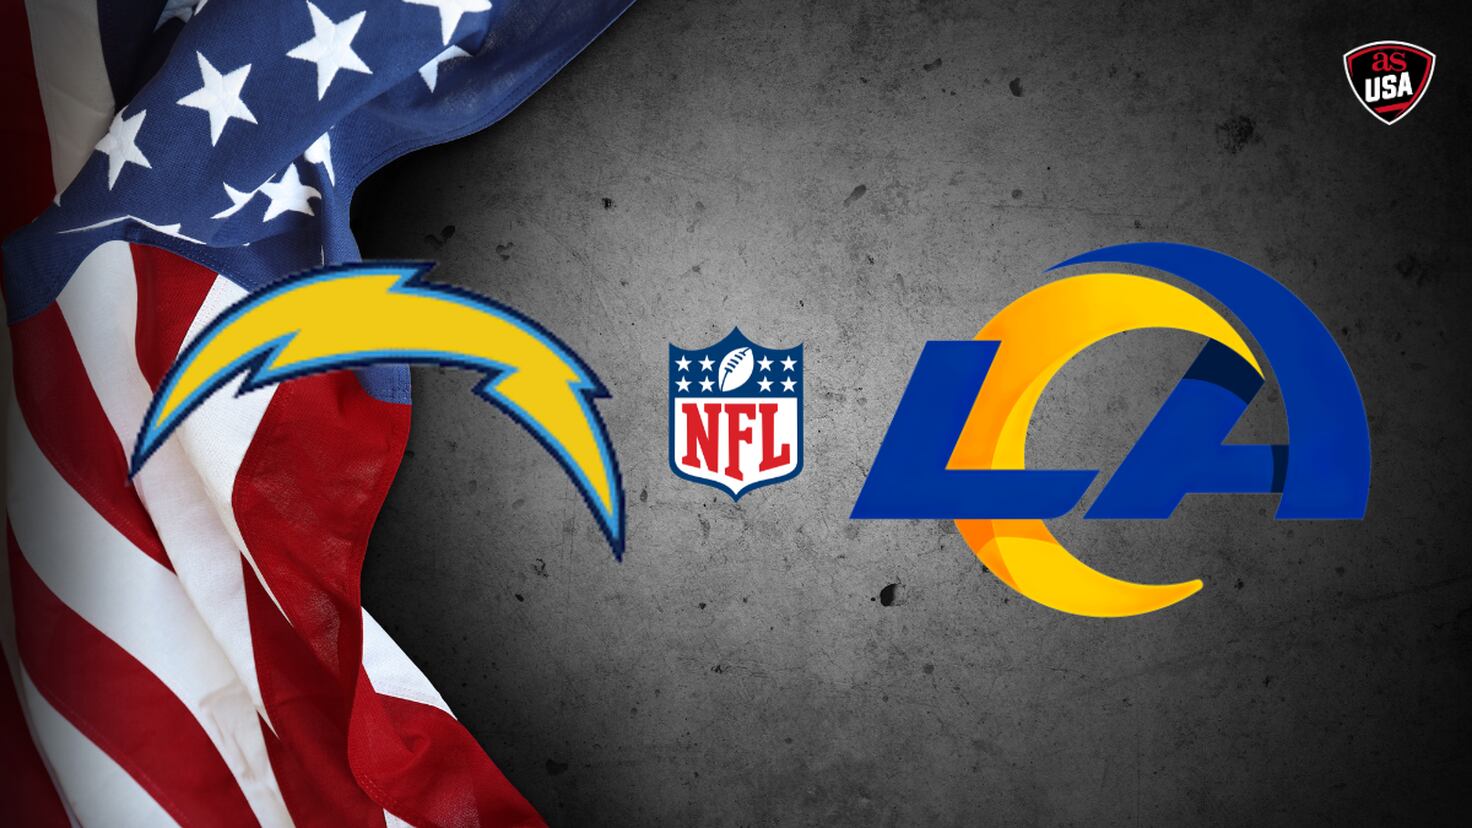 How to watch Rams at Chargers on August 13, 2022